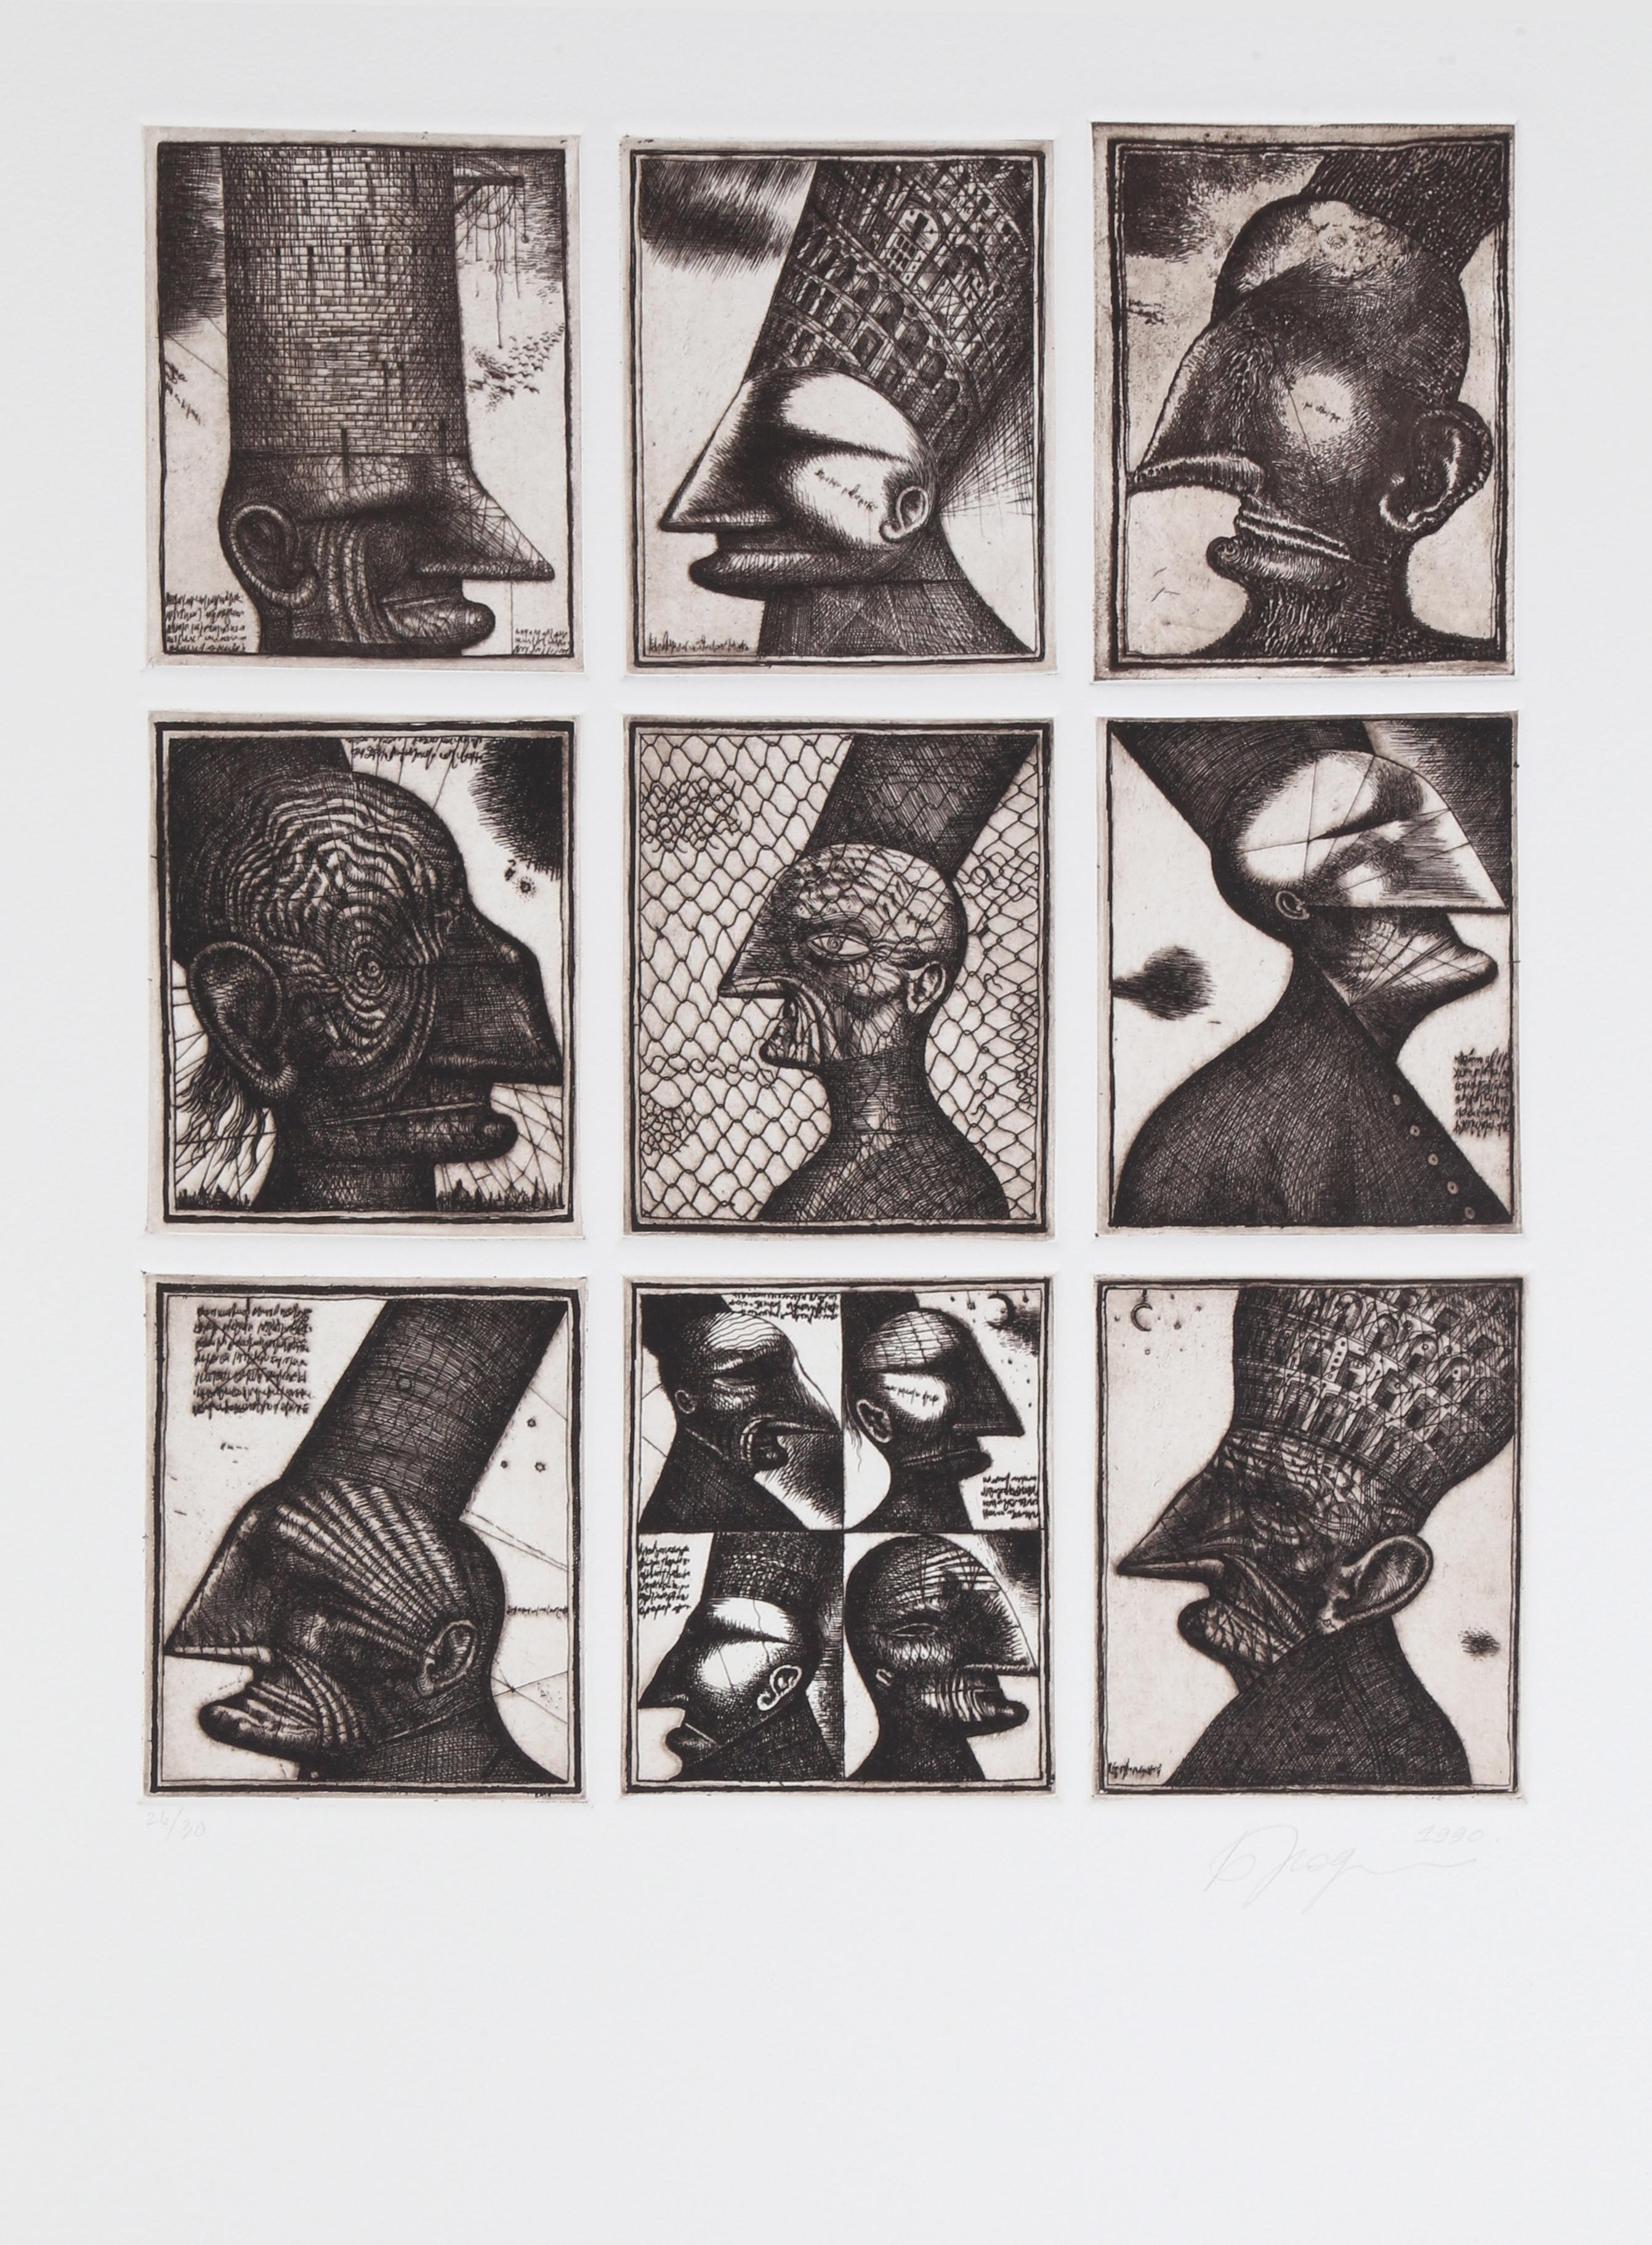 Unknown Person from Brodsky and Utkin: Projects 1981 - 1990